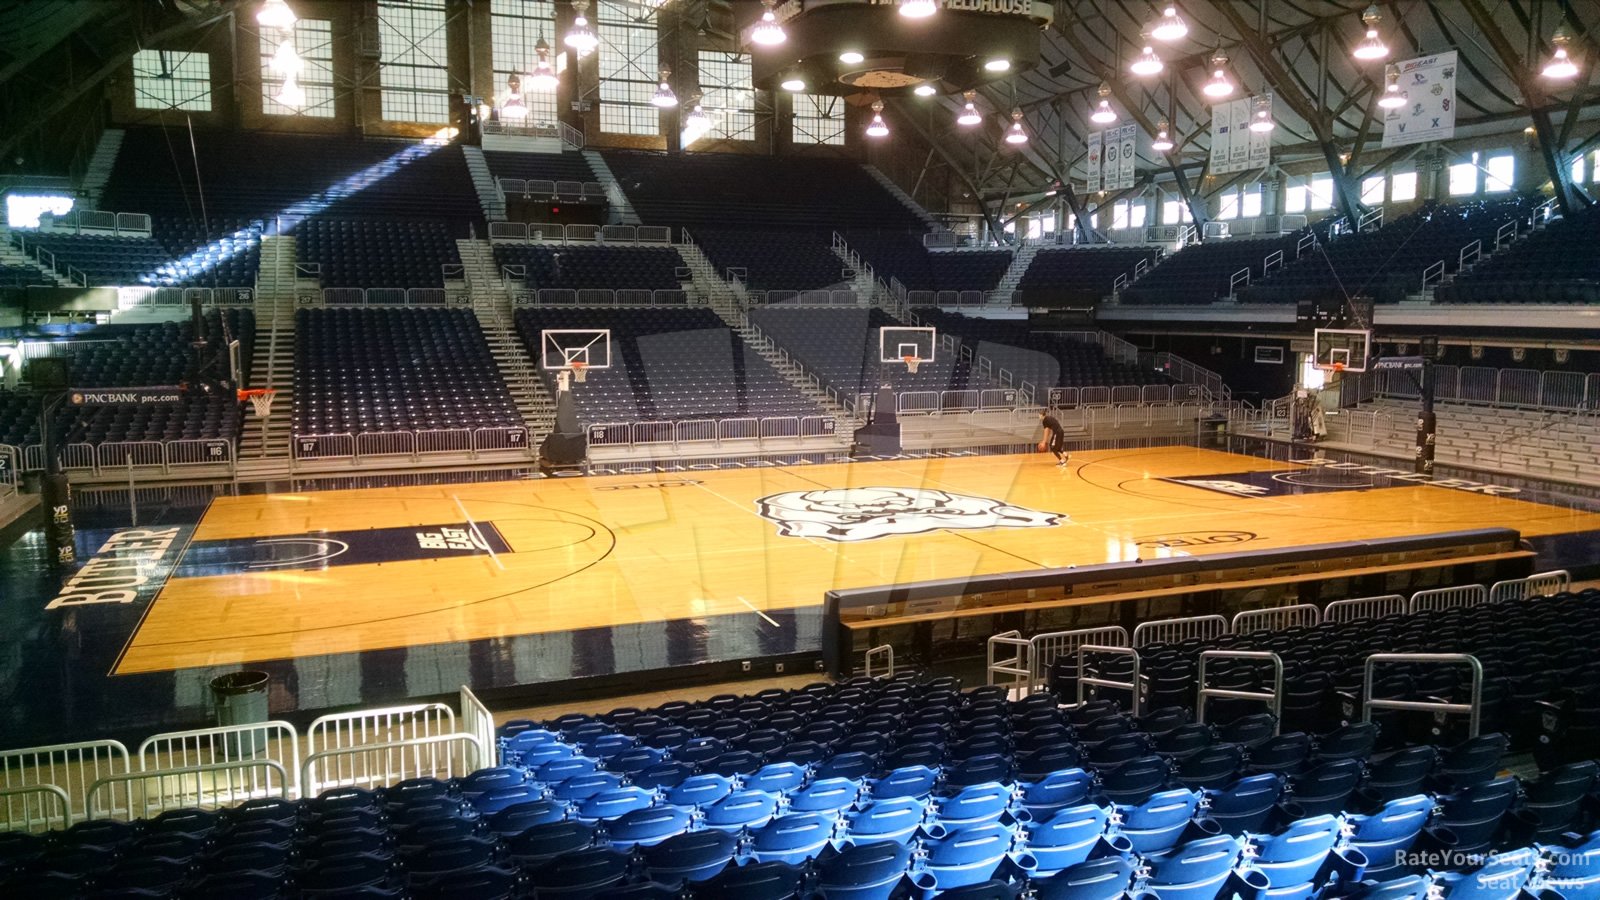 section 107, row 15 seat view  - hinkle fieldhouse